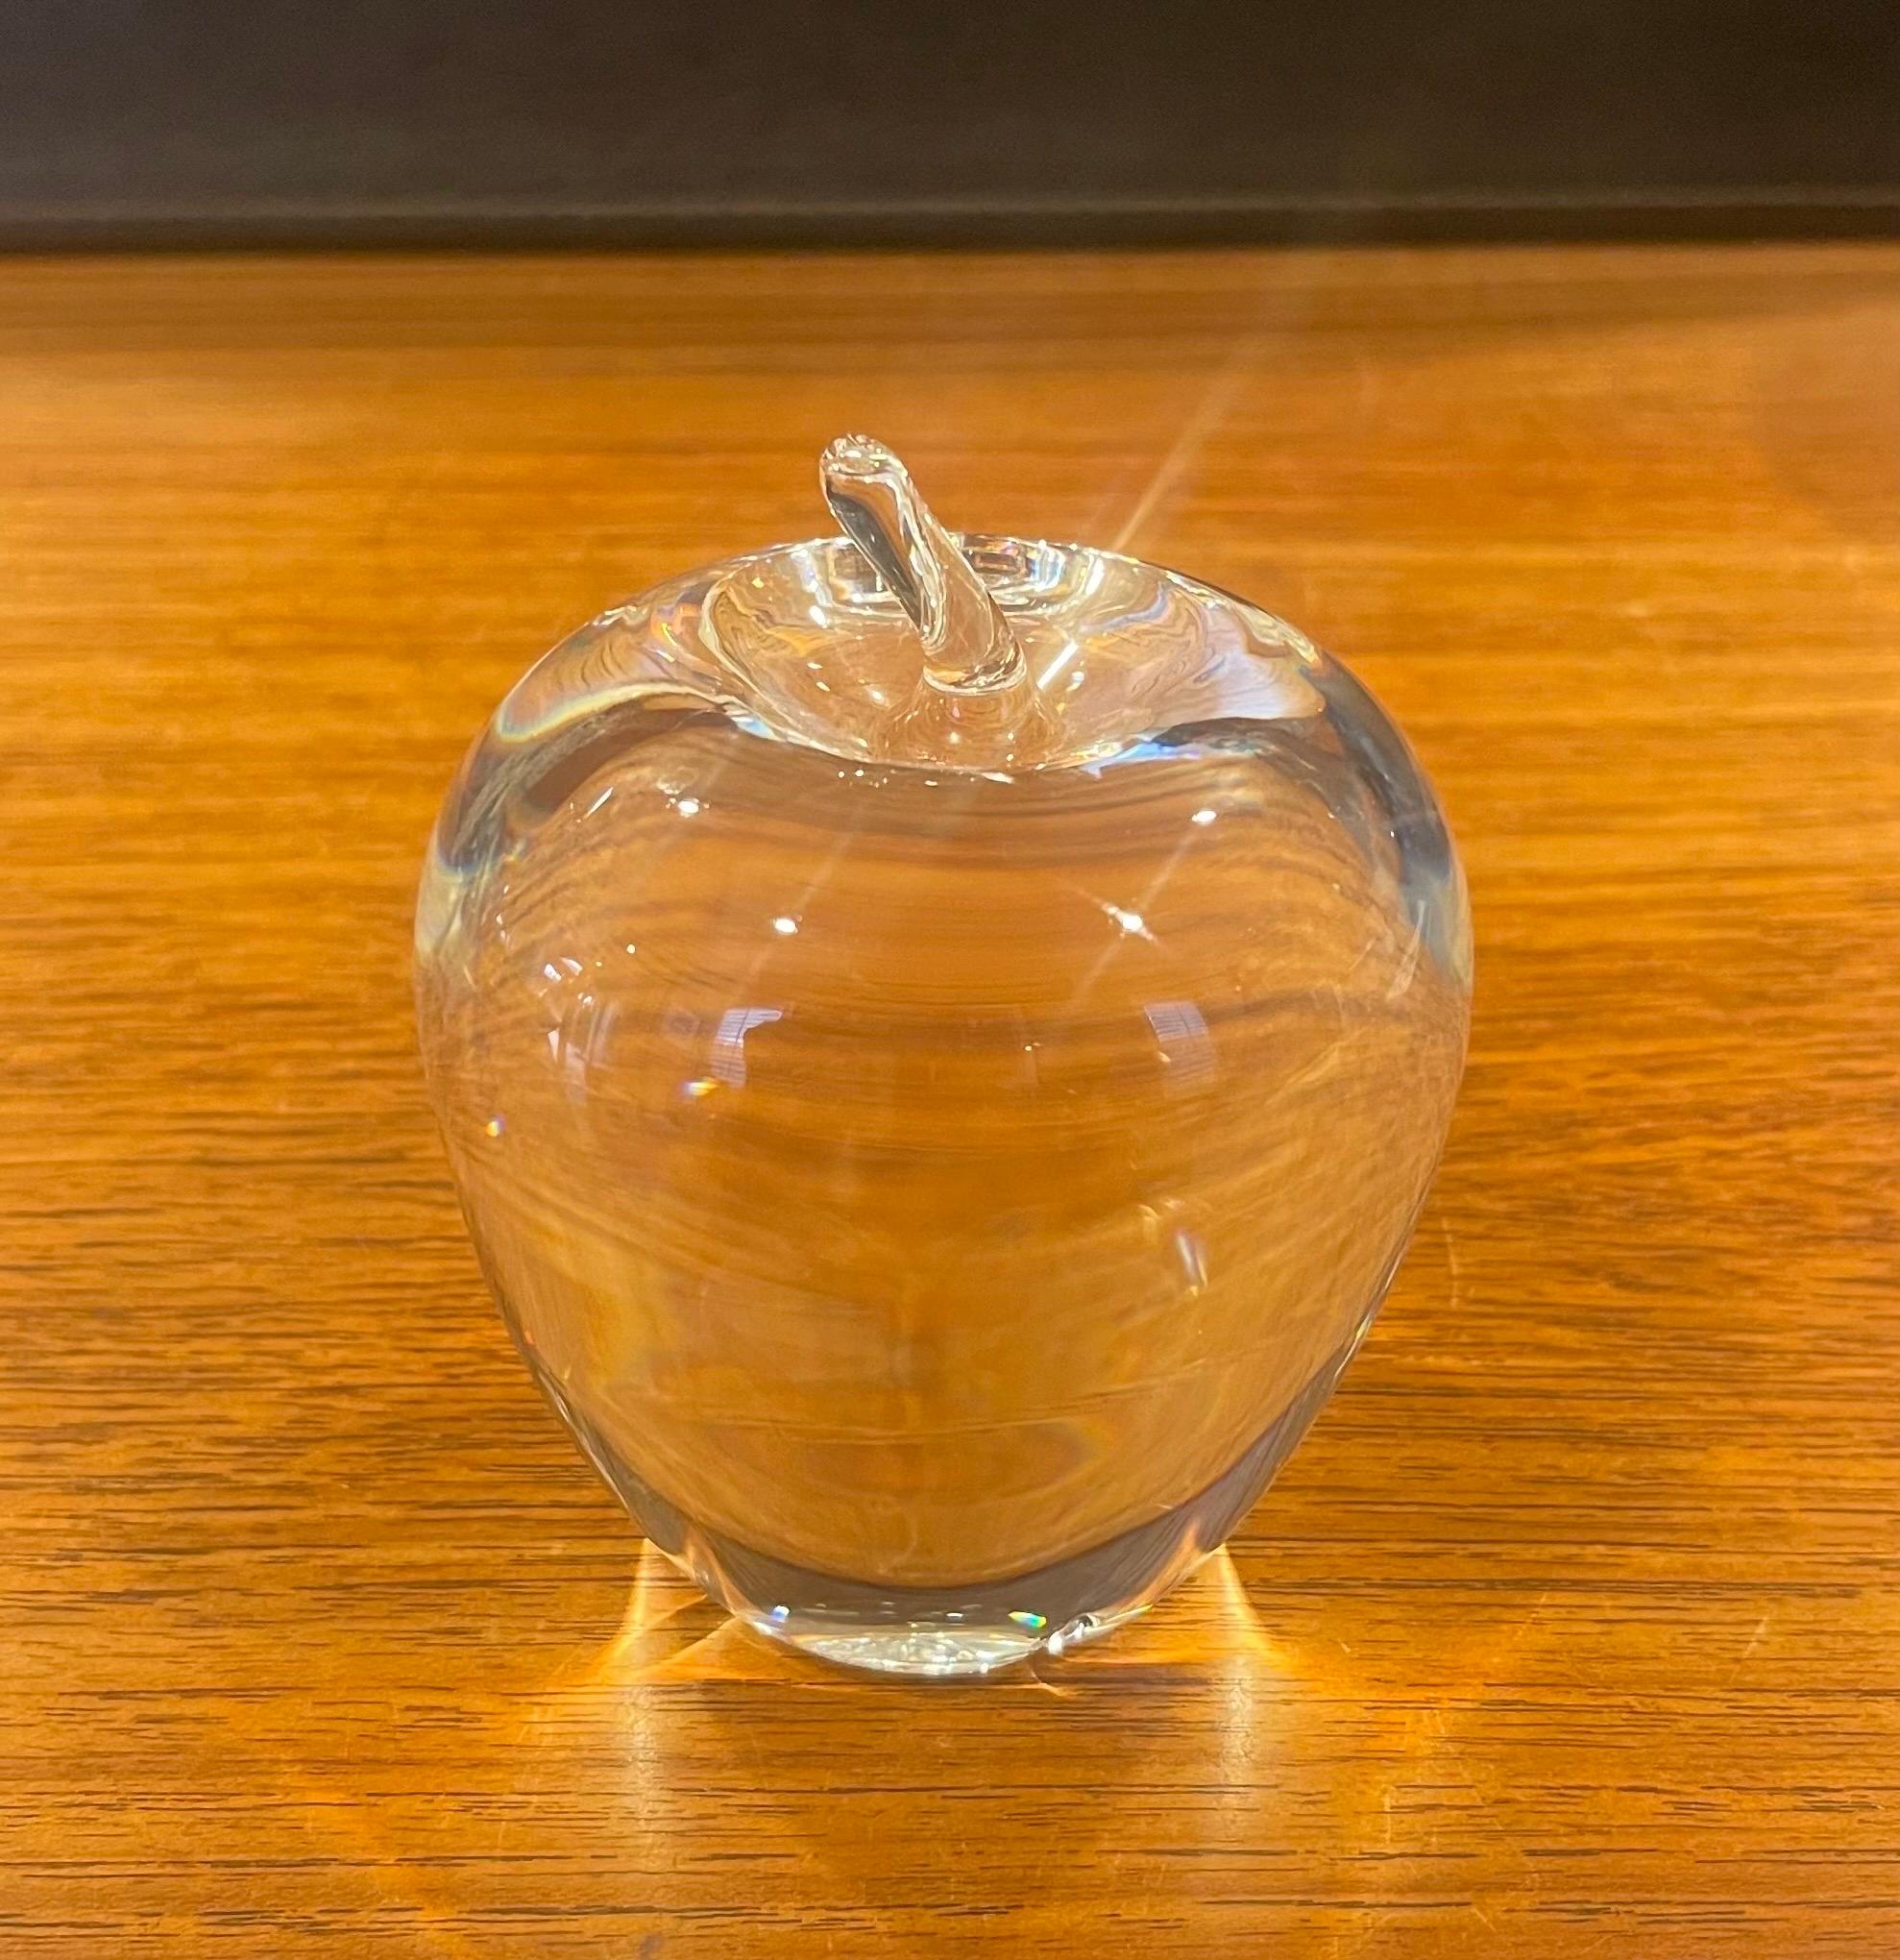 Crystal Apple Sculpture / Paper Weight by Steuben Glassworks 1